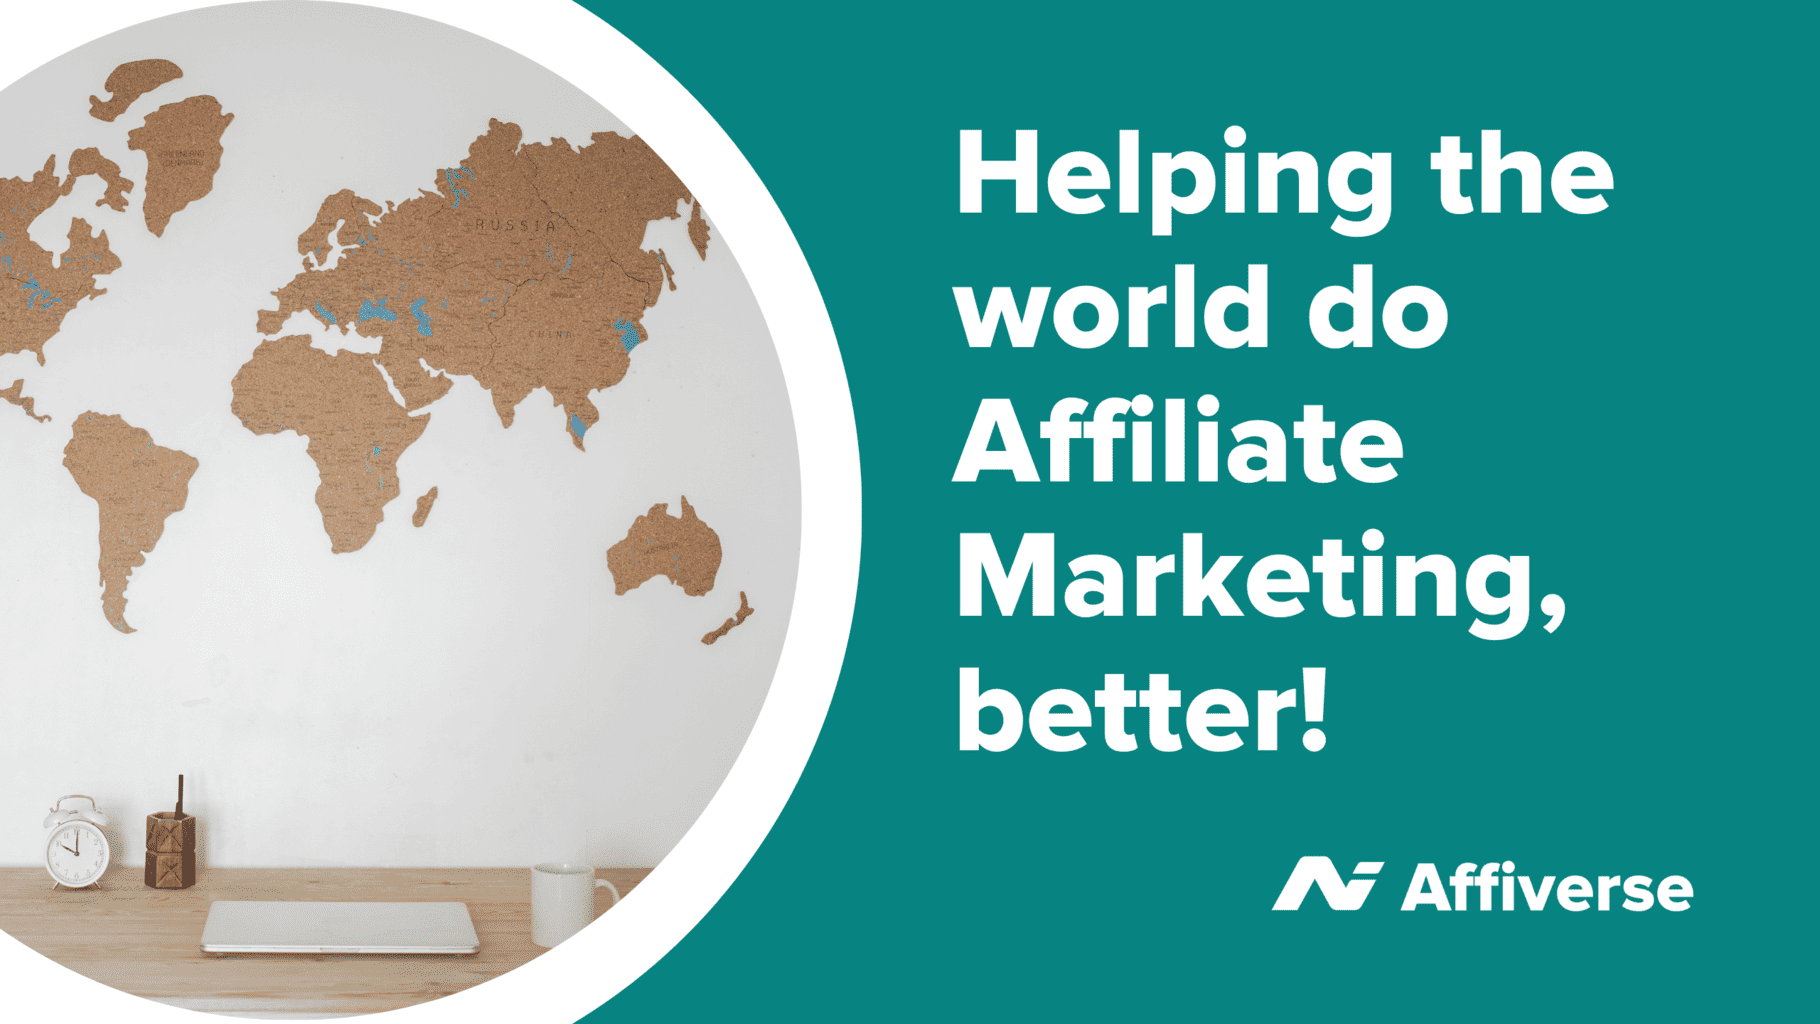 How Is Affiverse Helping the World Do Affiliate Marketing, Better?